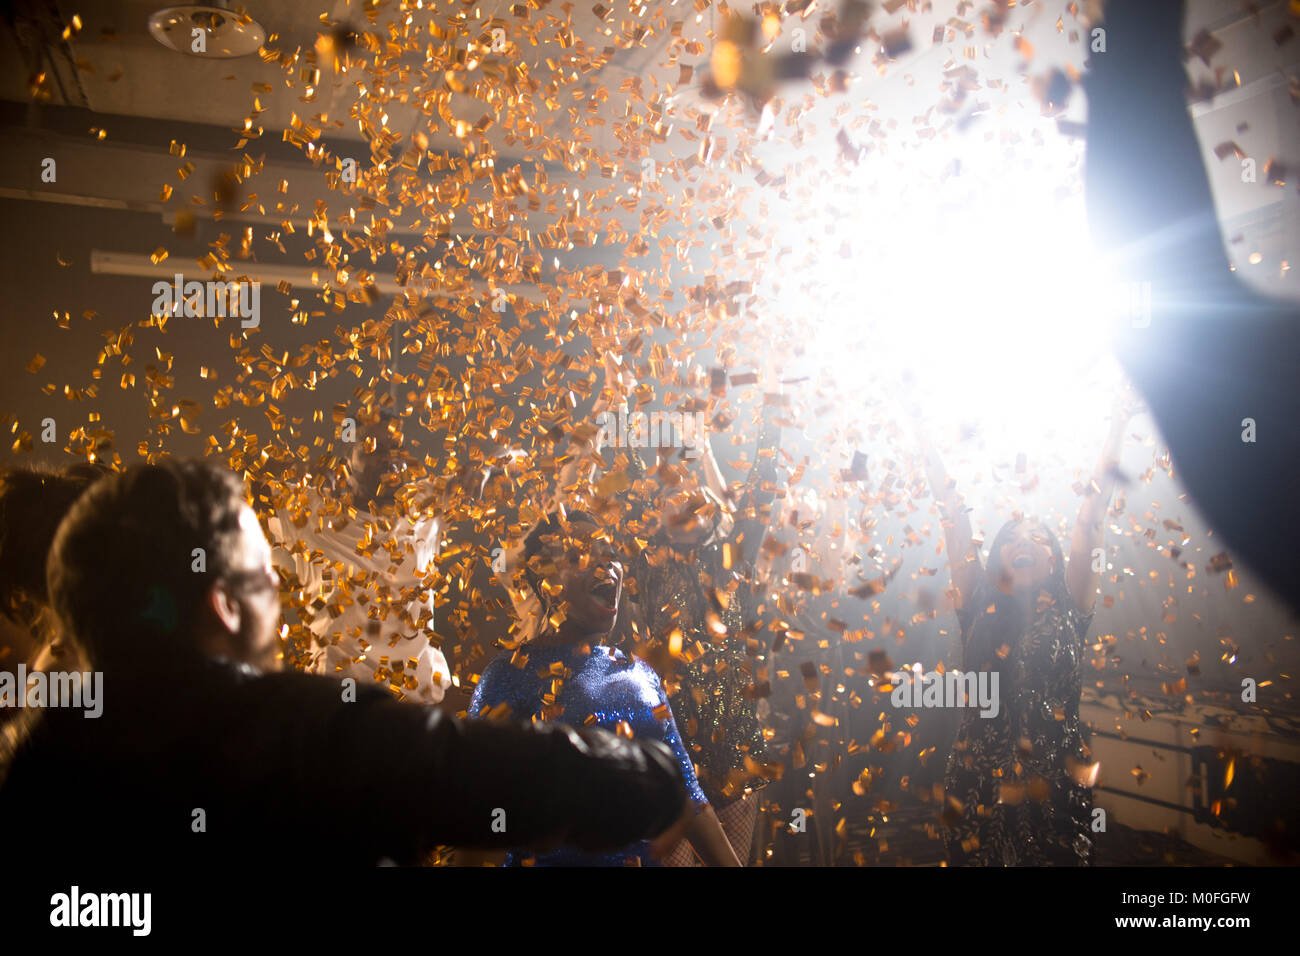 Confetti Burst at Nightclub Party Banque D'Images